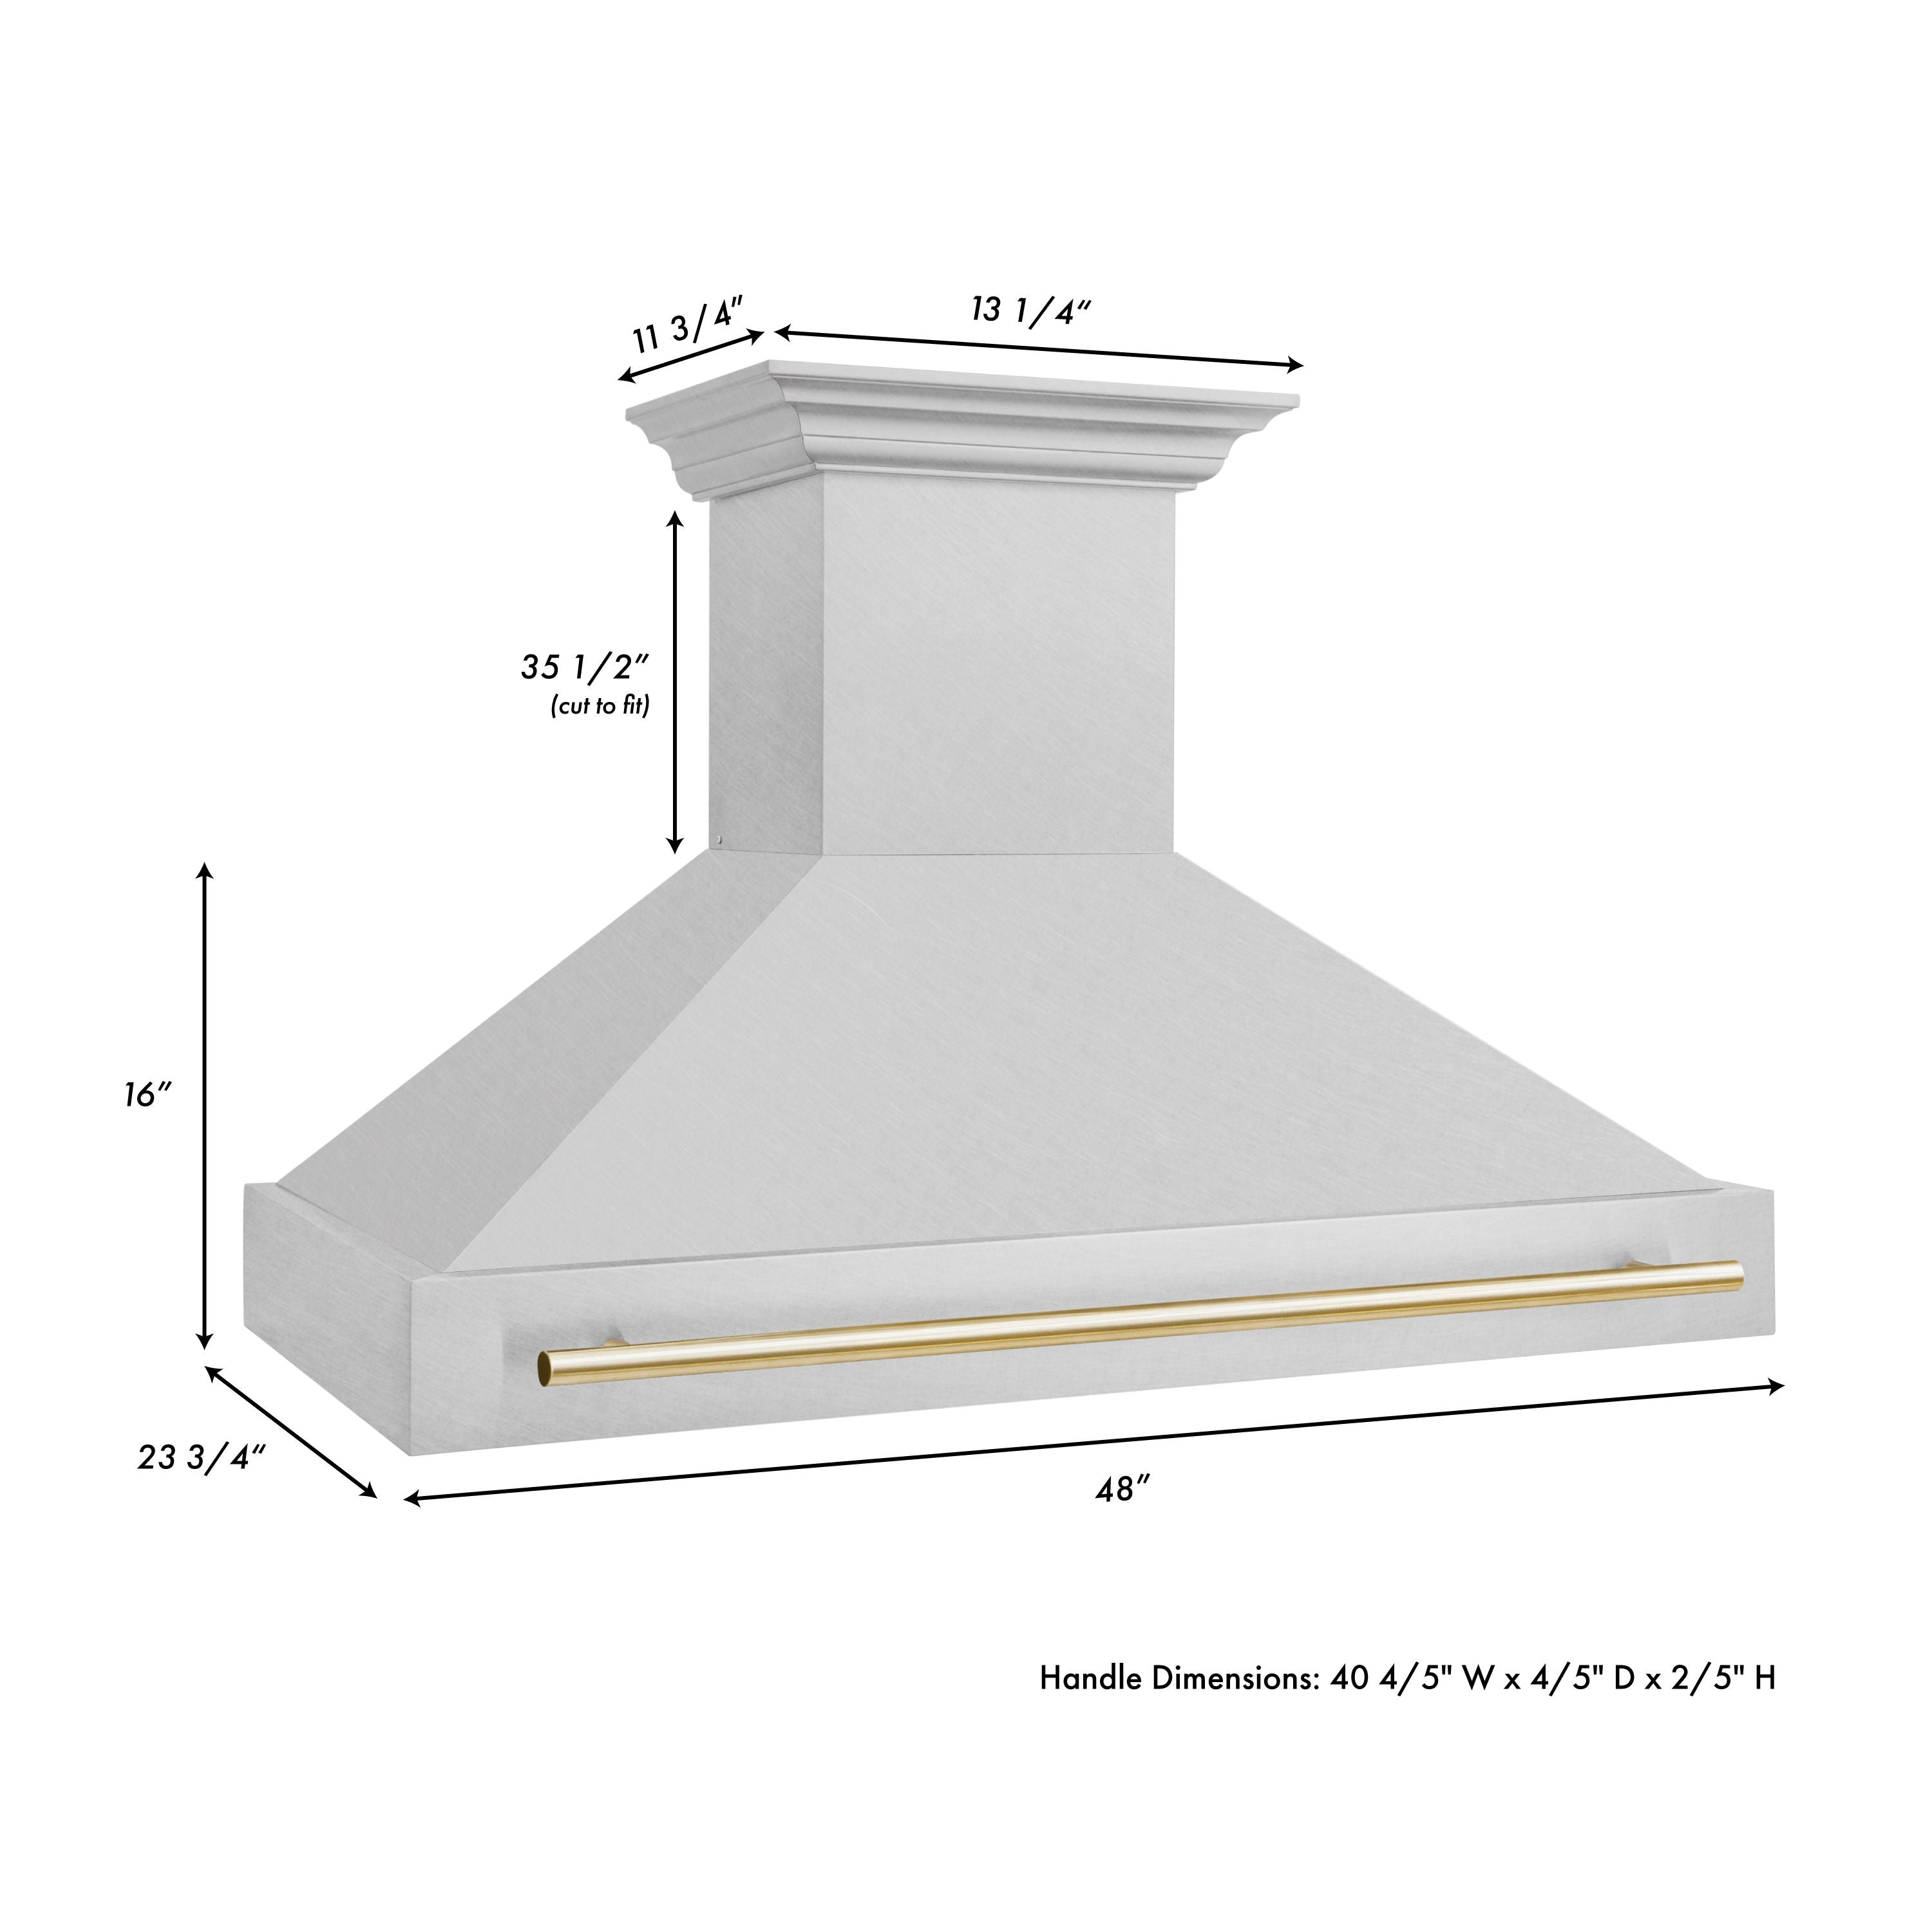 ZLINE Autograph 48 Inch DuraSnow® Stainless Steel Range Hood with DuraSnow® Shell and Gold Handle, 8654SNZ-48-G